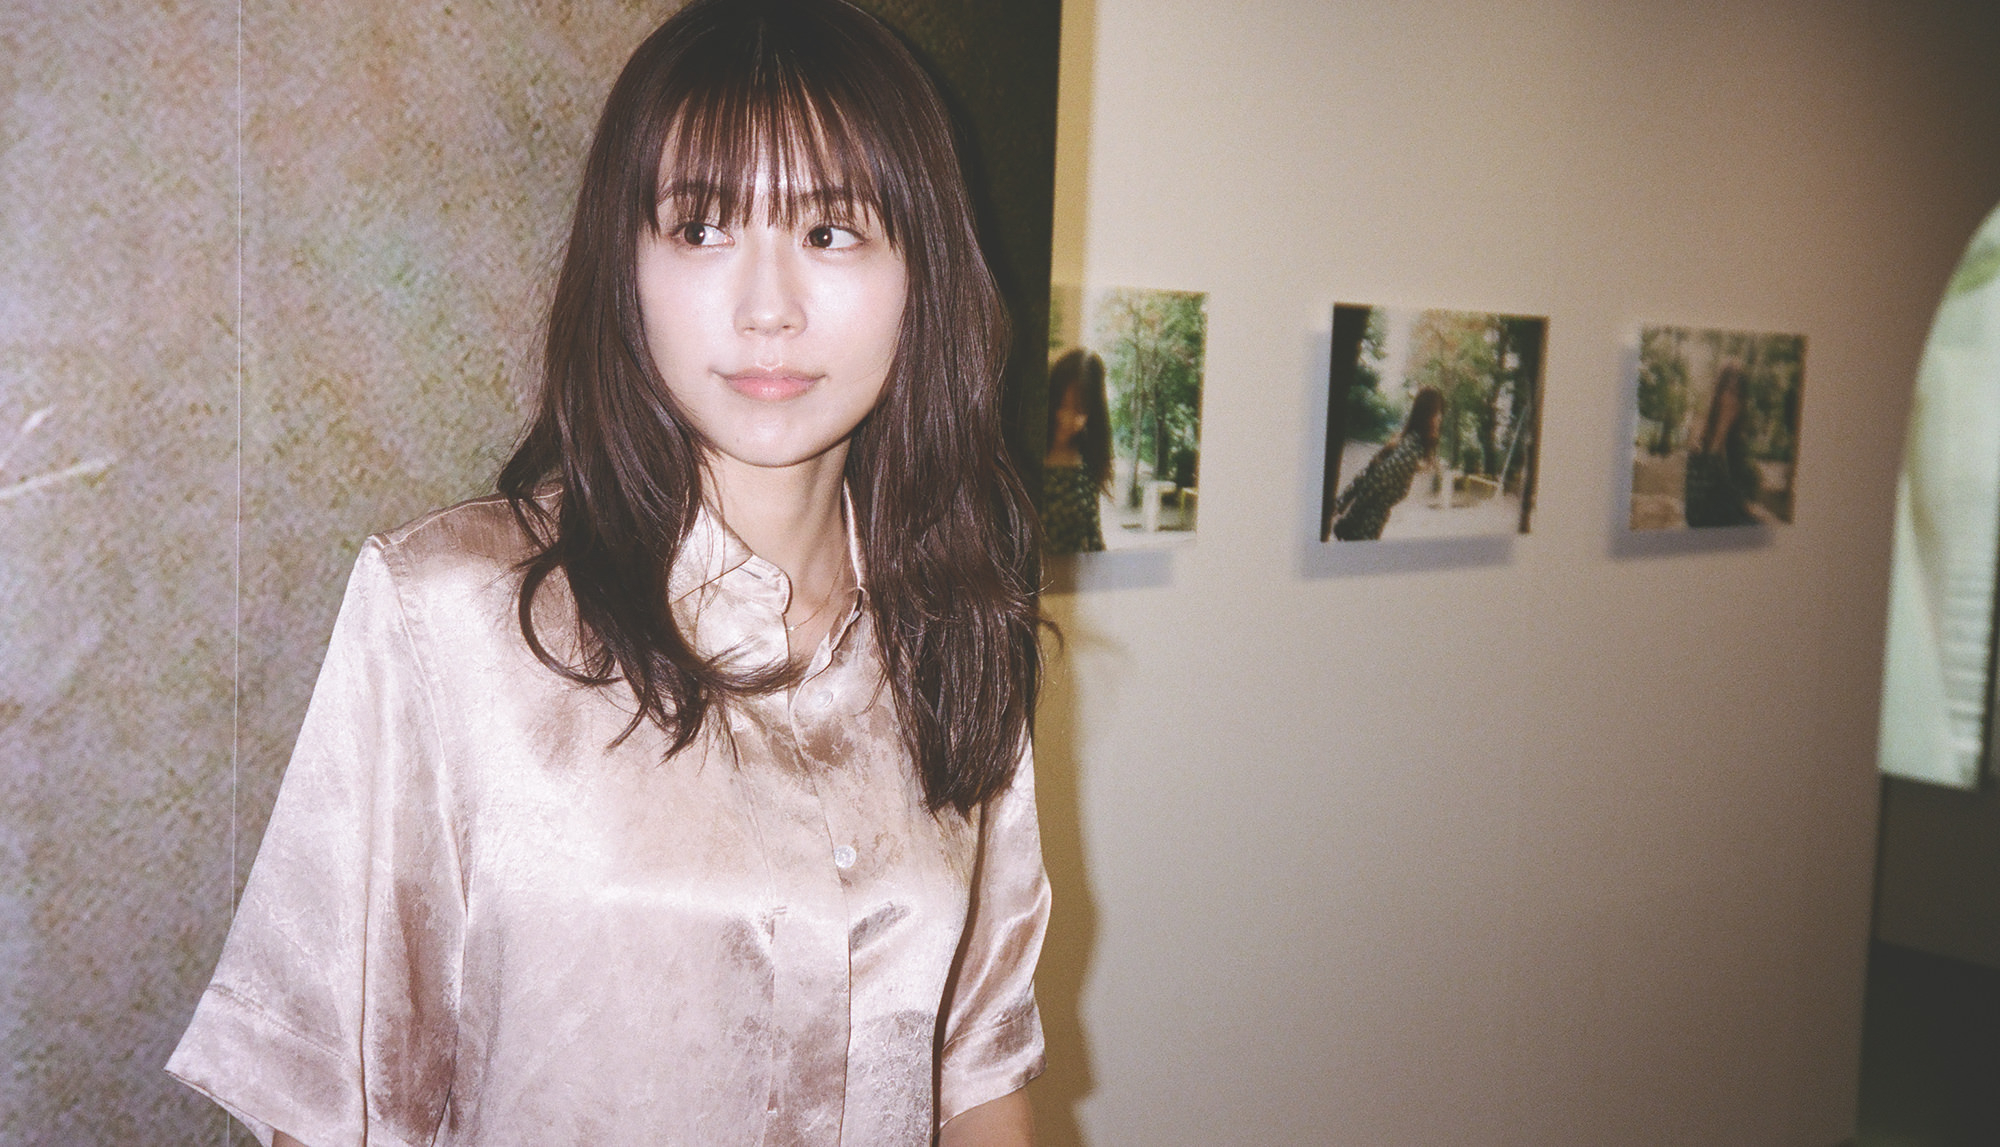 Interview Kasumi Arimura Photo Exhibition "sou." | "Imagine, at any time." Kasumi Arimura's 30-year-old Record | Parco Cruise| PARCO (Parco) 